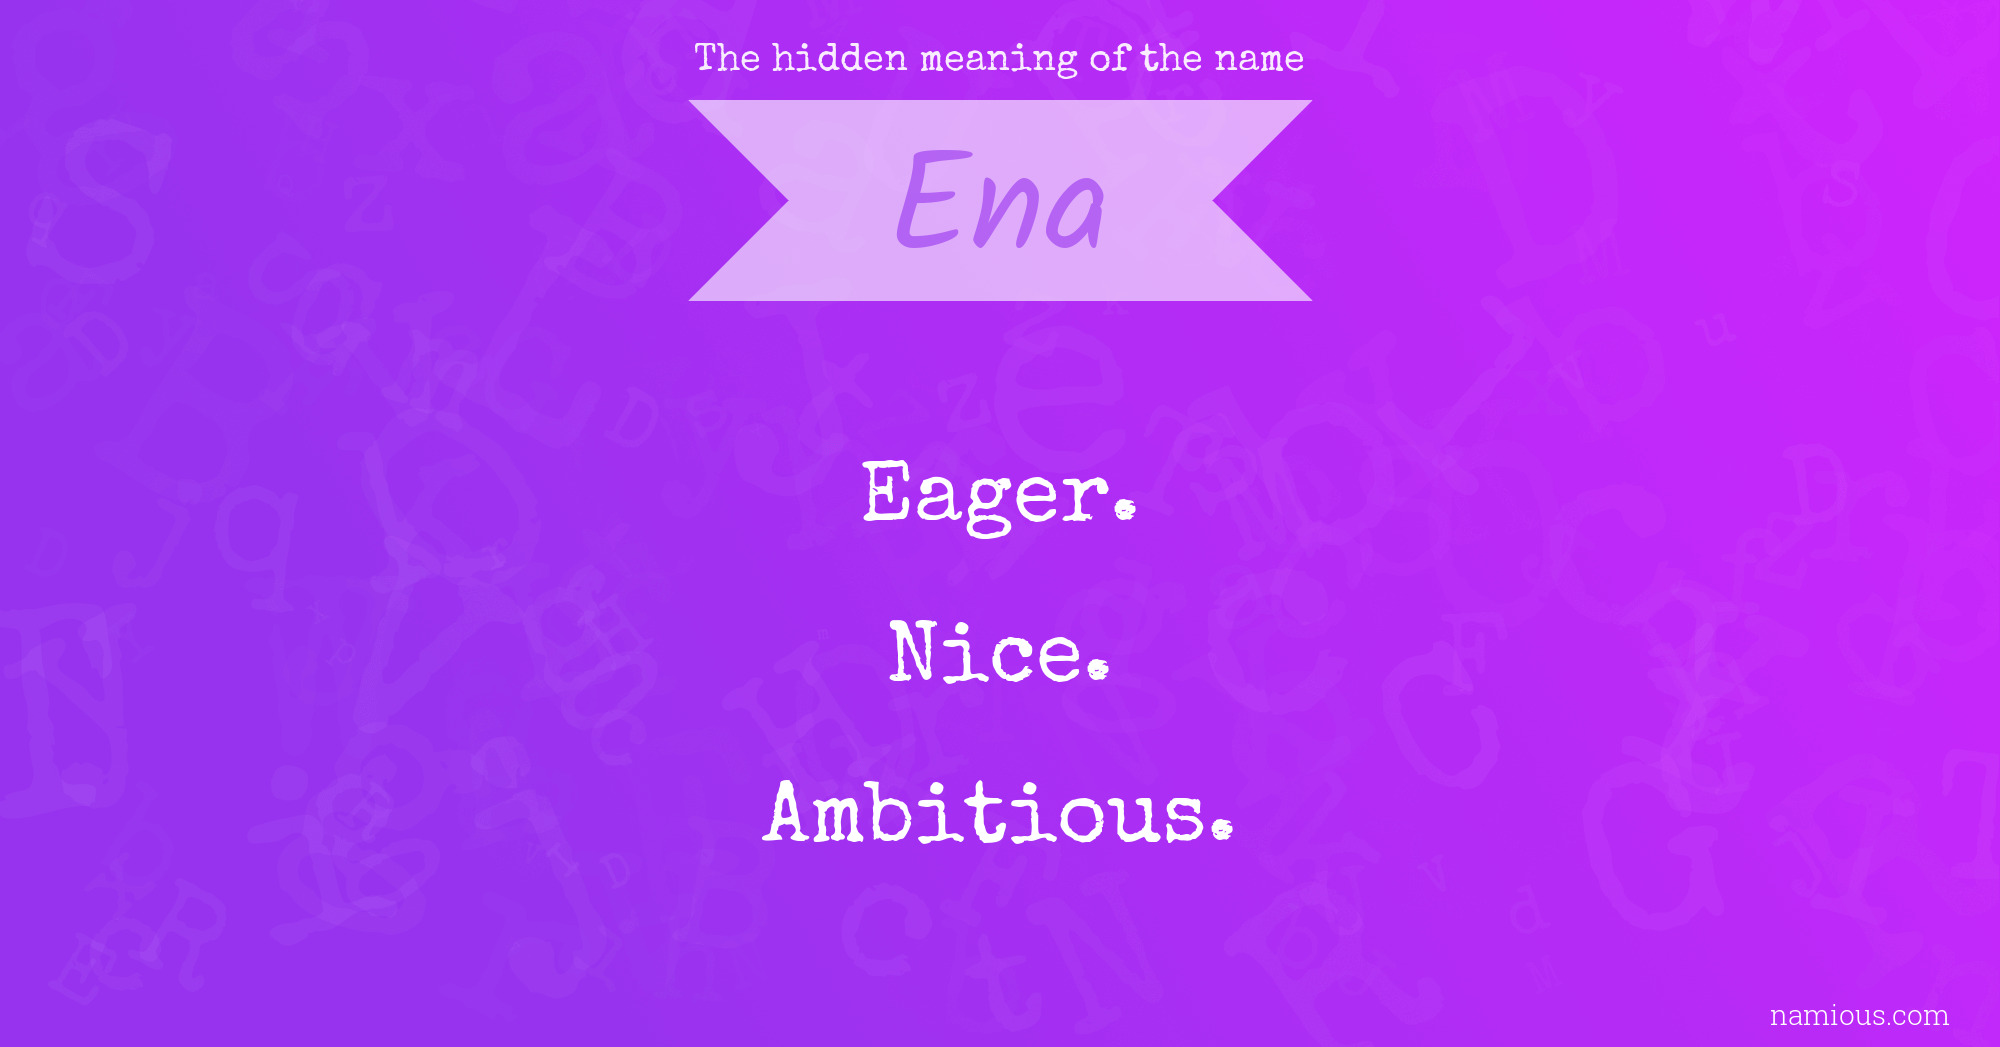 The hidden meaning of the name Ena